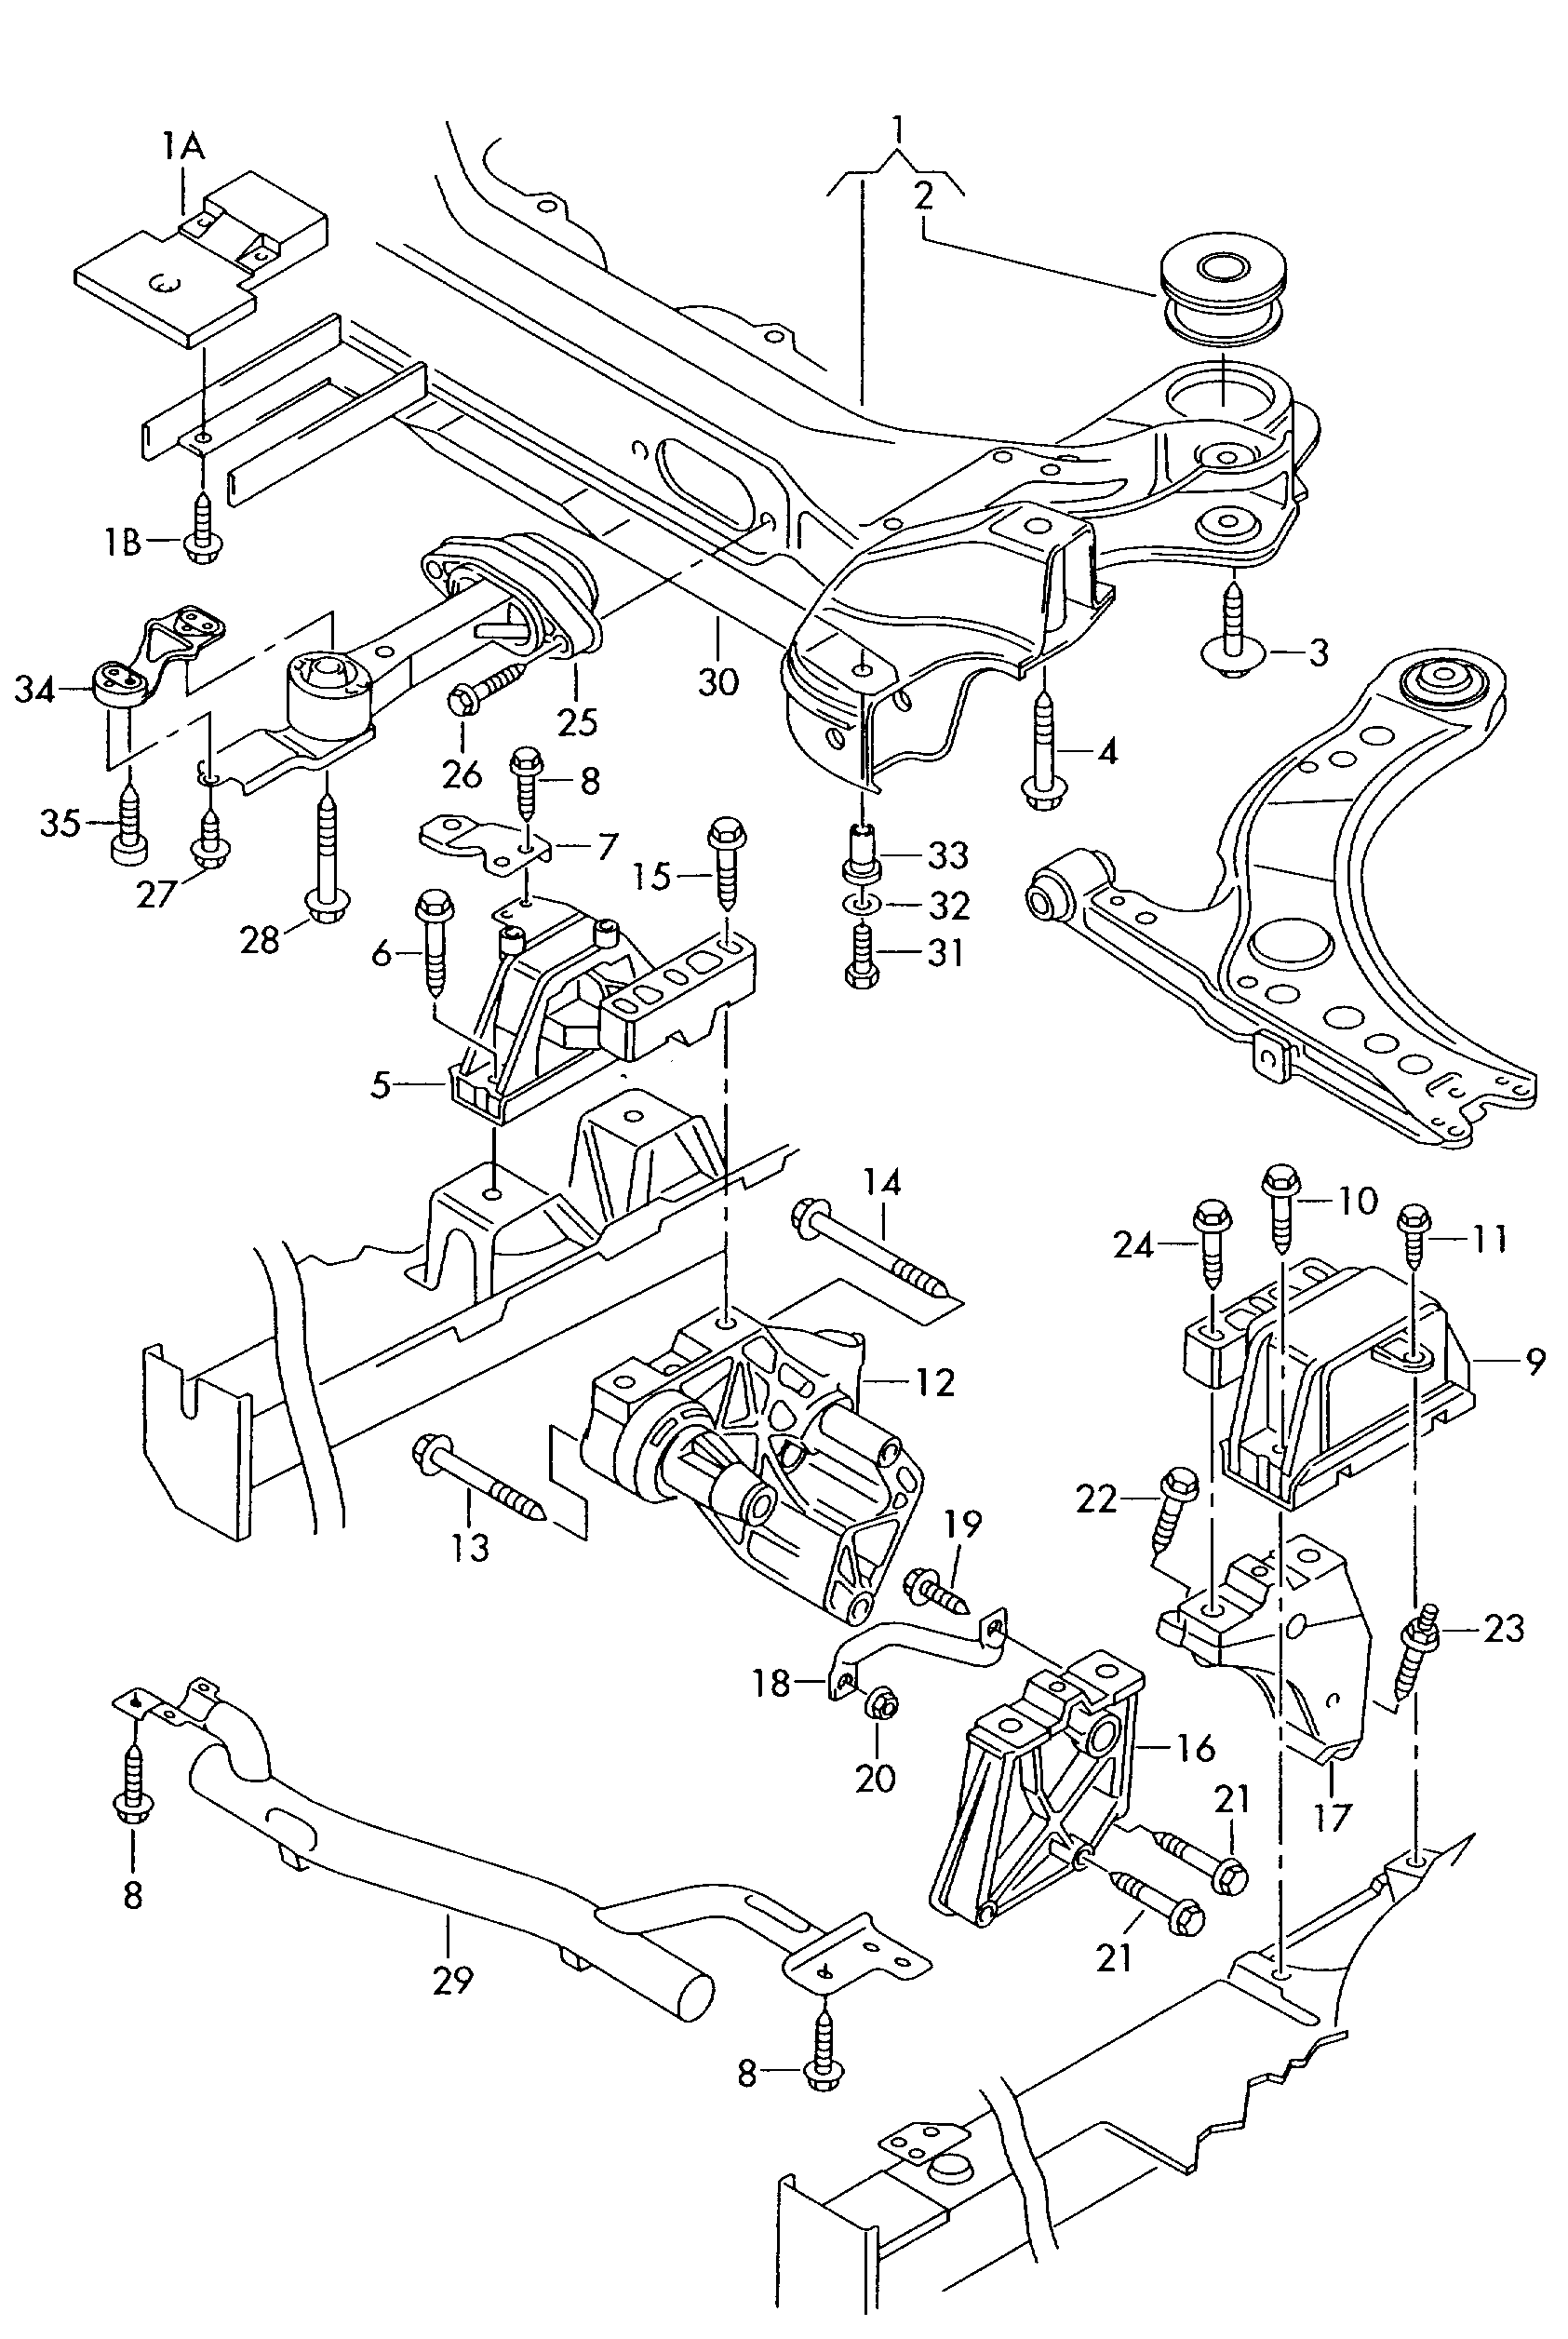 mounting parts for engine and<br>transmission  - Golf/Variant/4Motion - golf